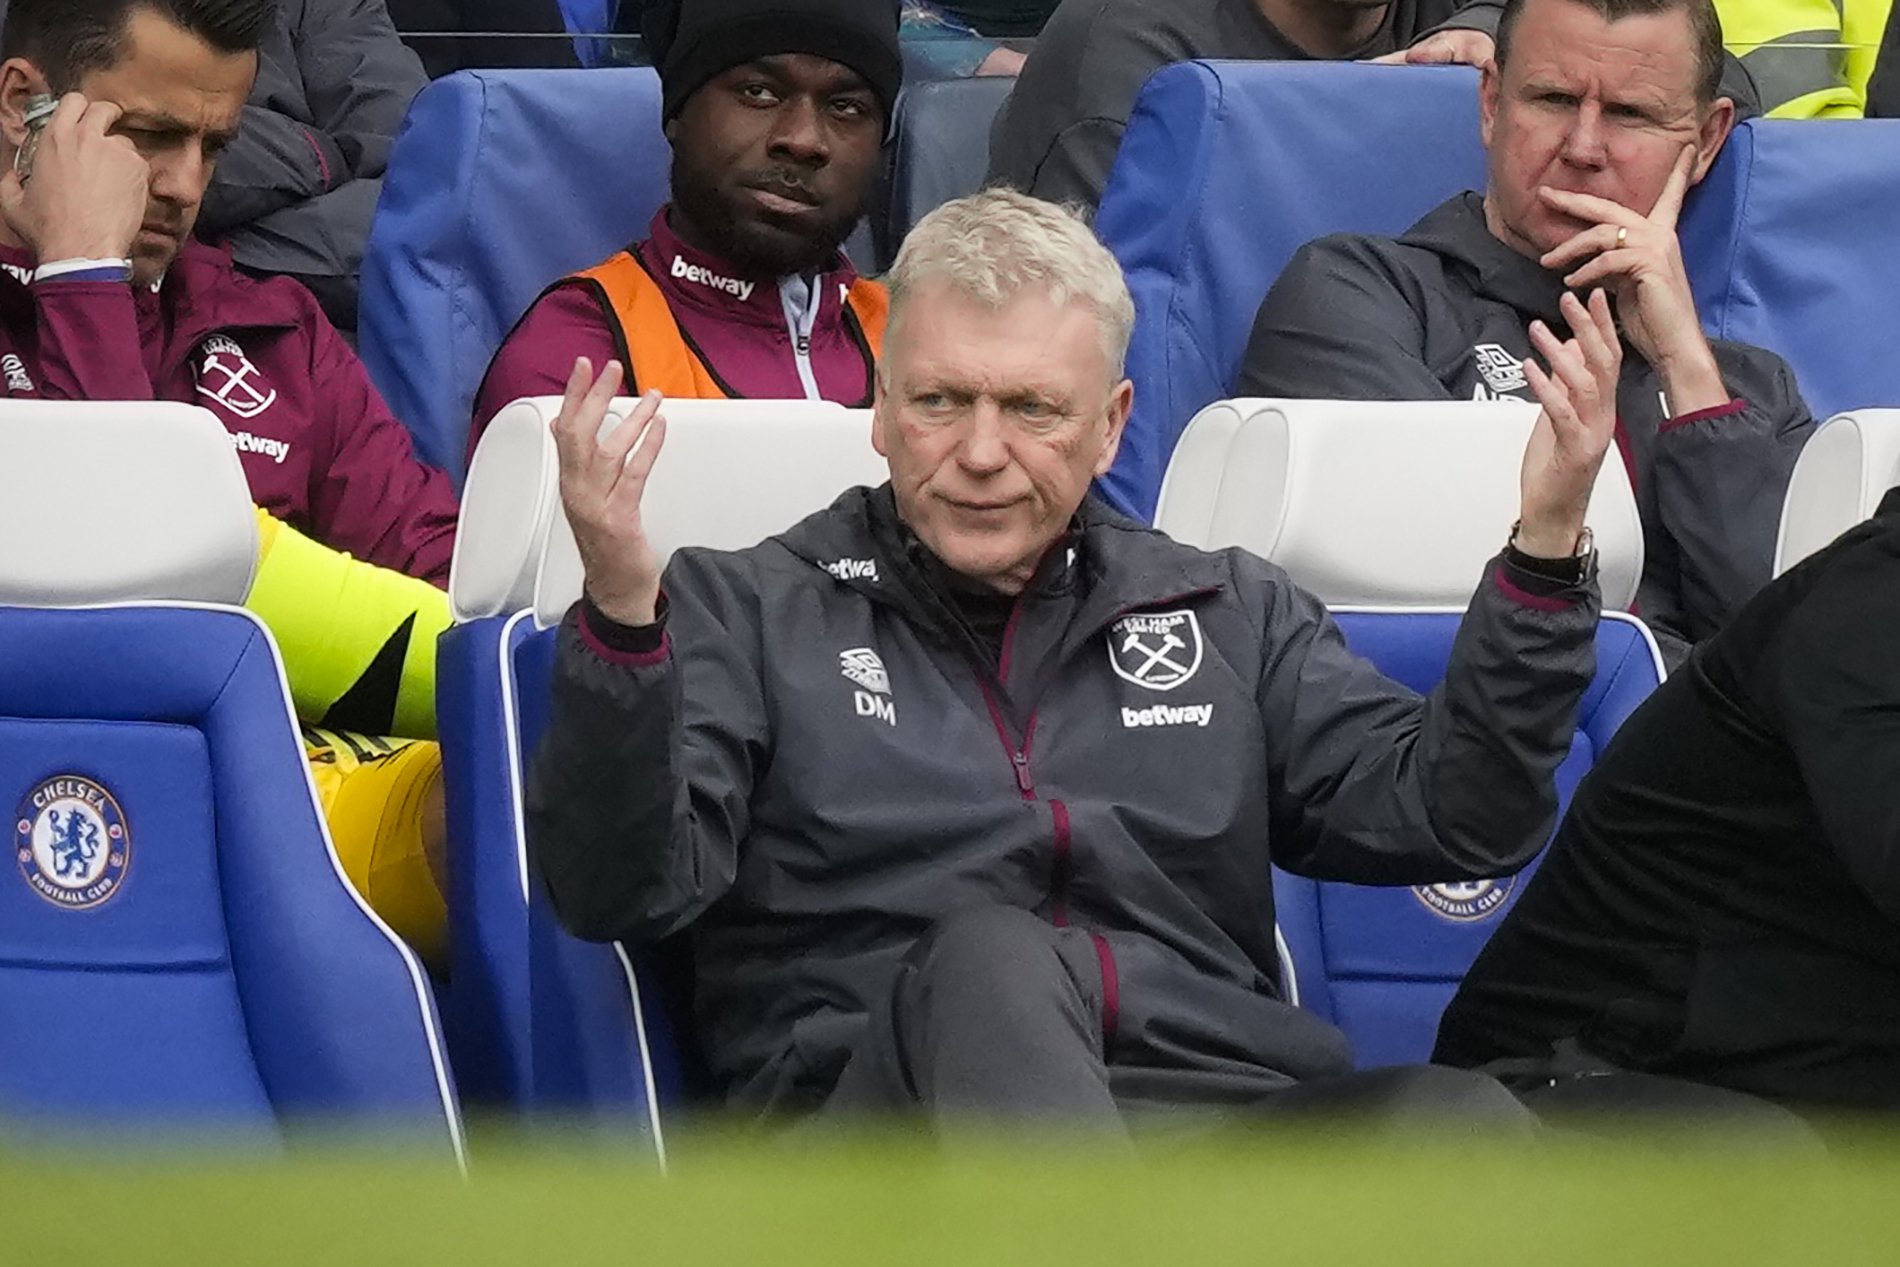 david moyes blames declan rice after west ham's 5-0 defeat to chelsea